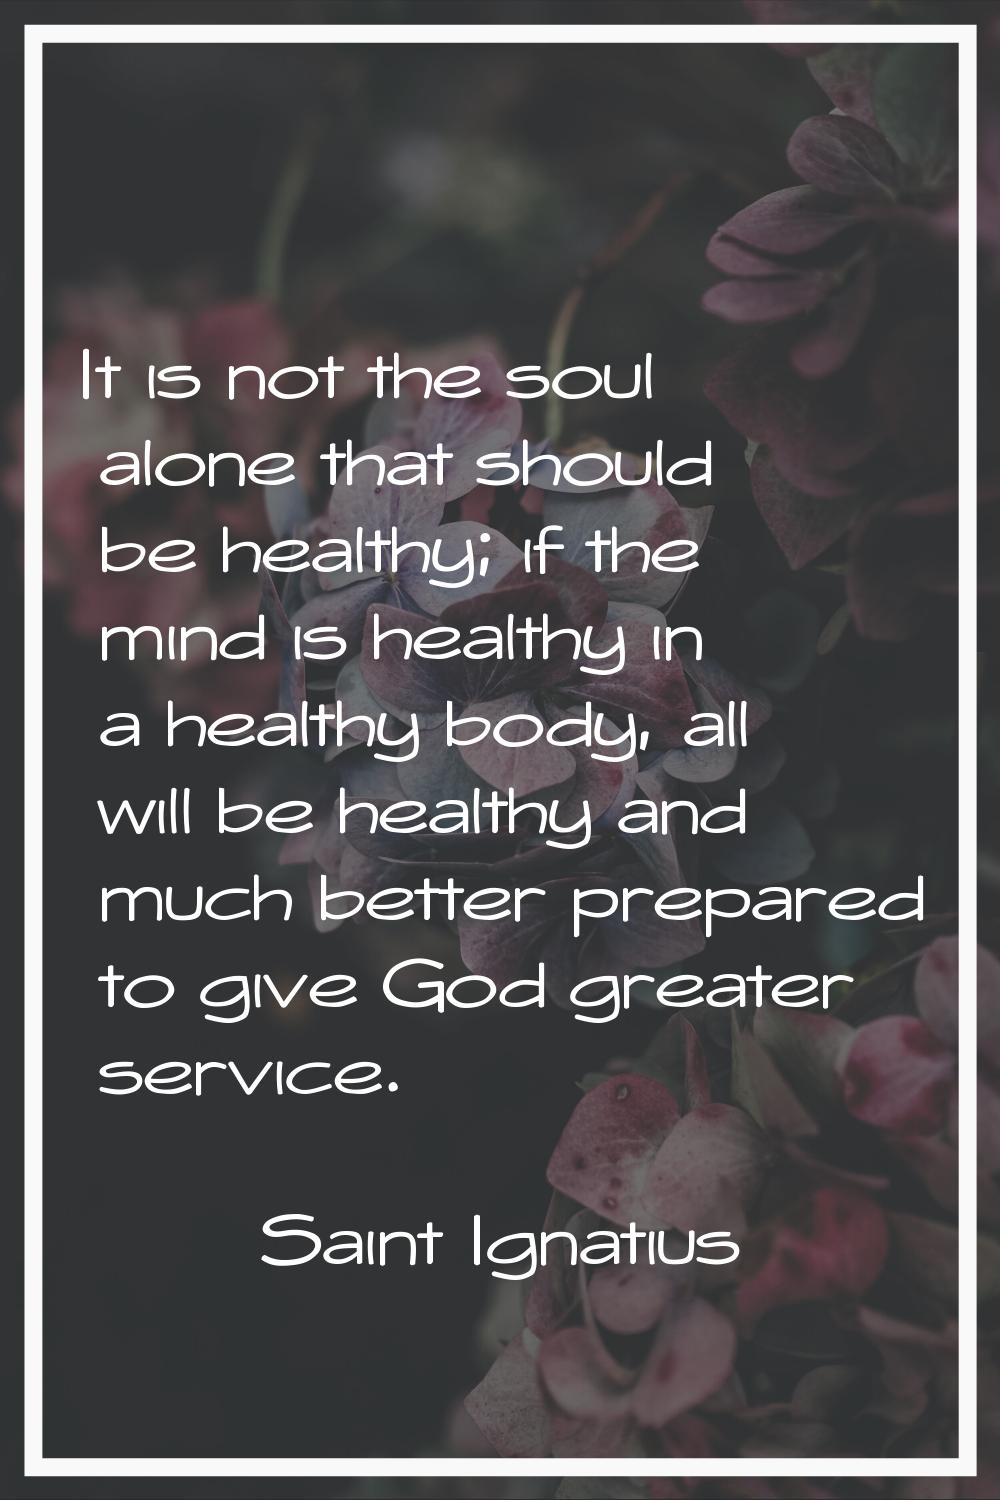 It is not the soul alone that should be healthy; if the mind is healthy in a healthy body, all will